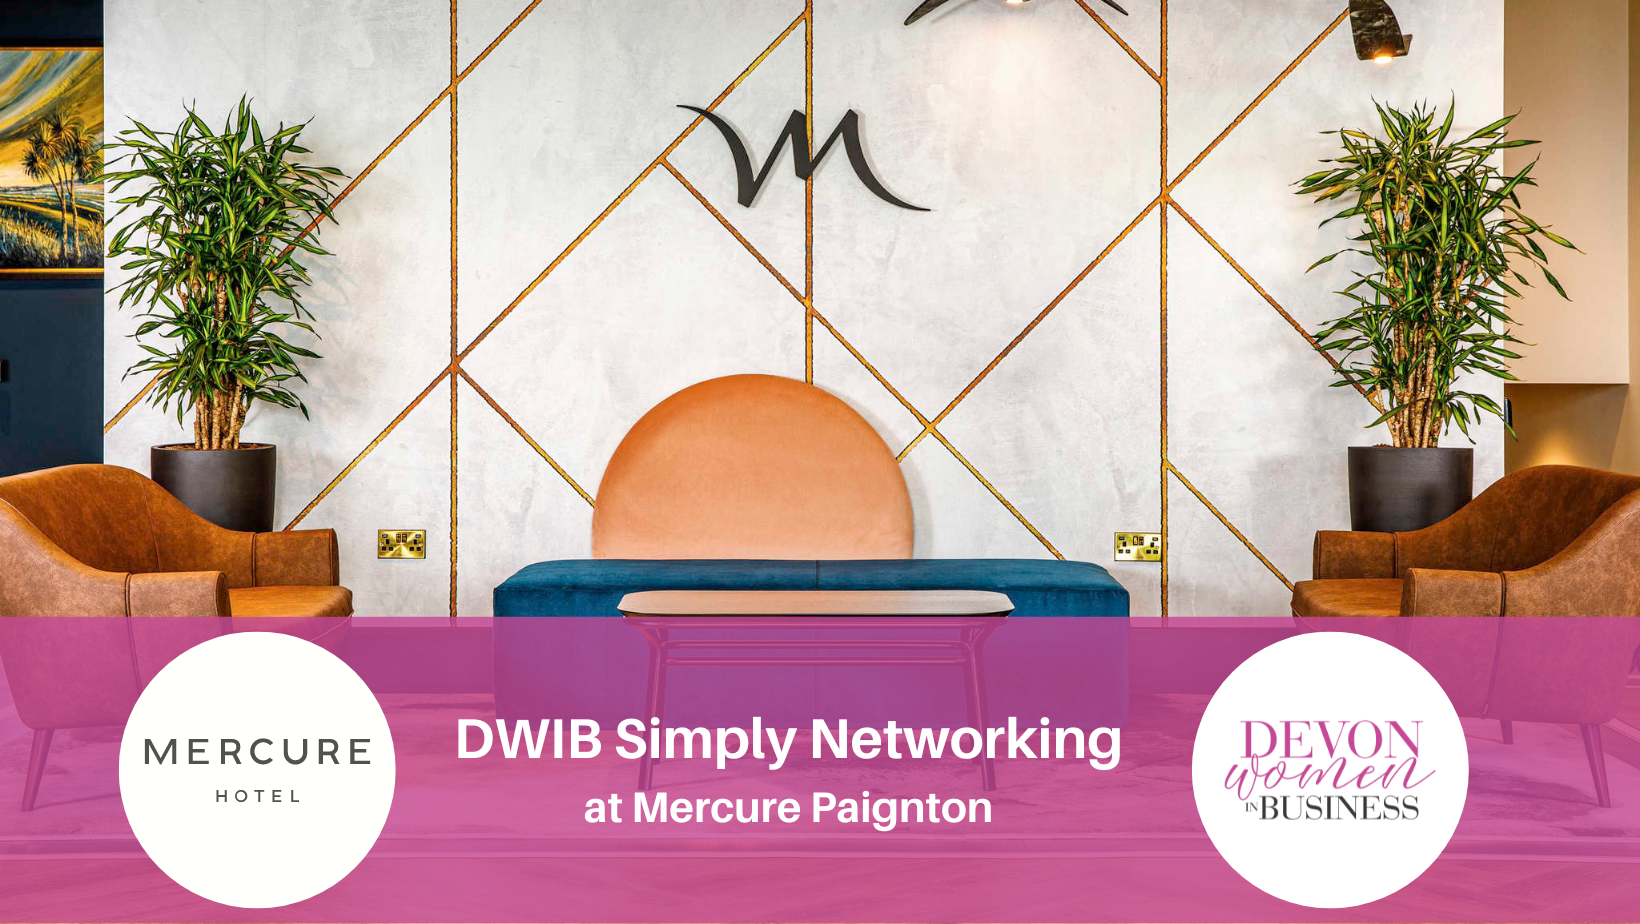 Interior shot of the lounge at Mercure Hotel Paignton, venue for DWIB Simply Networking.